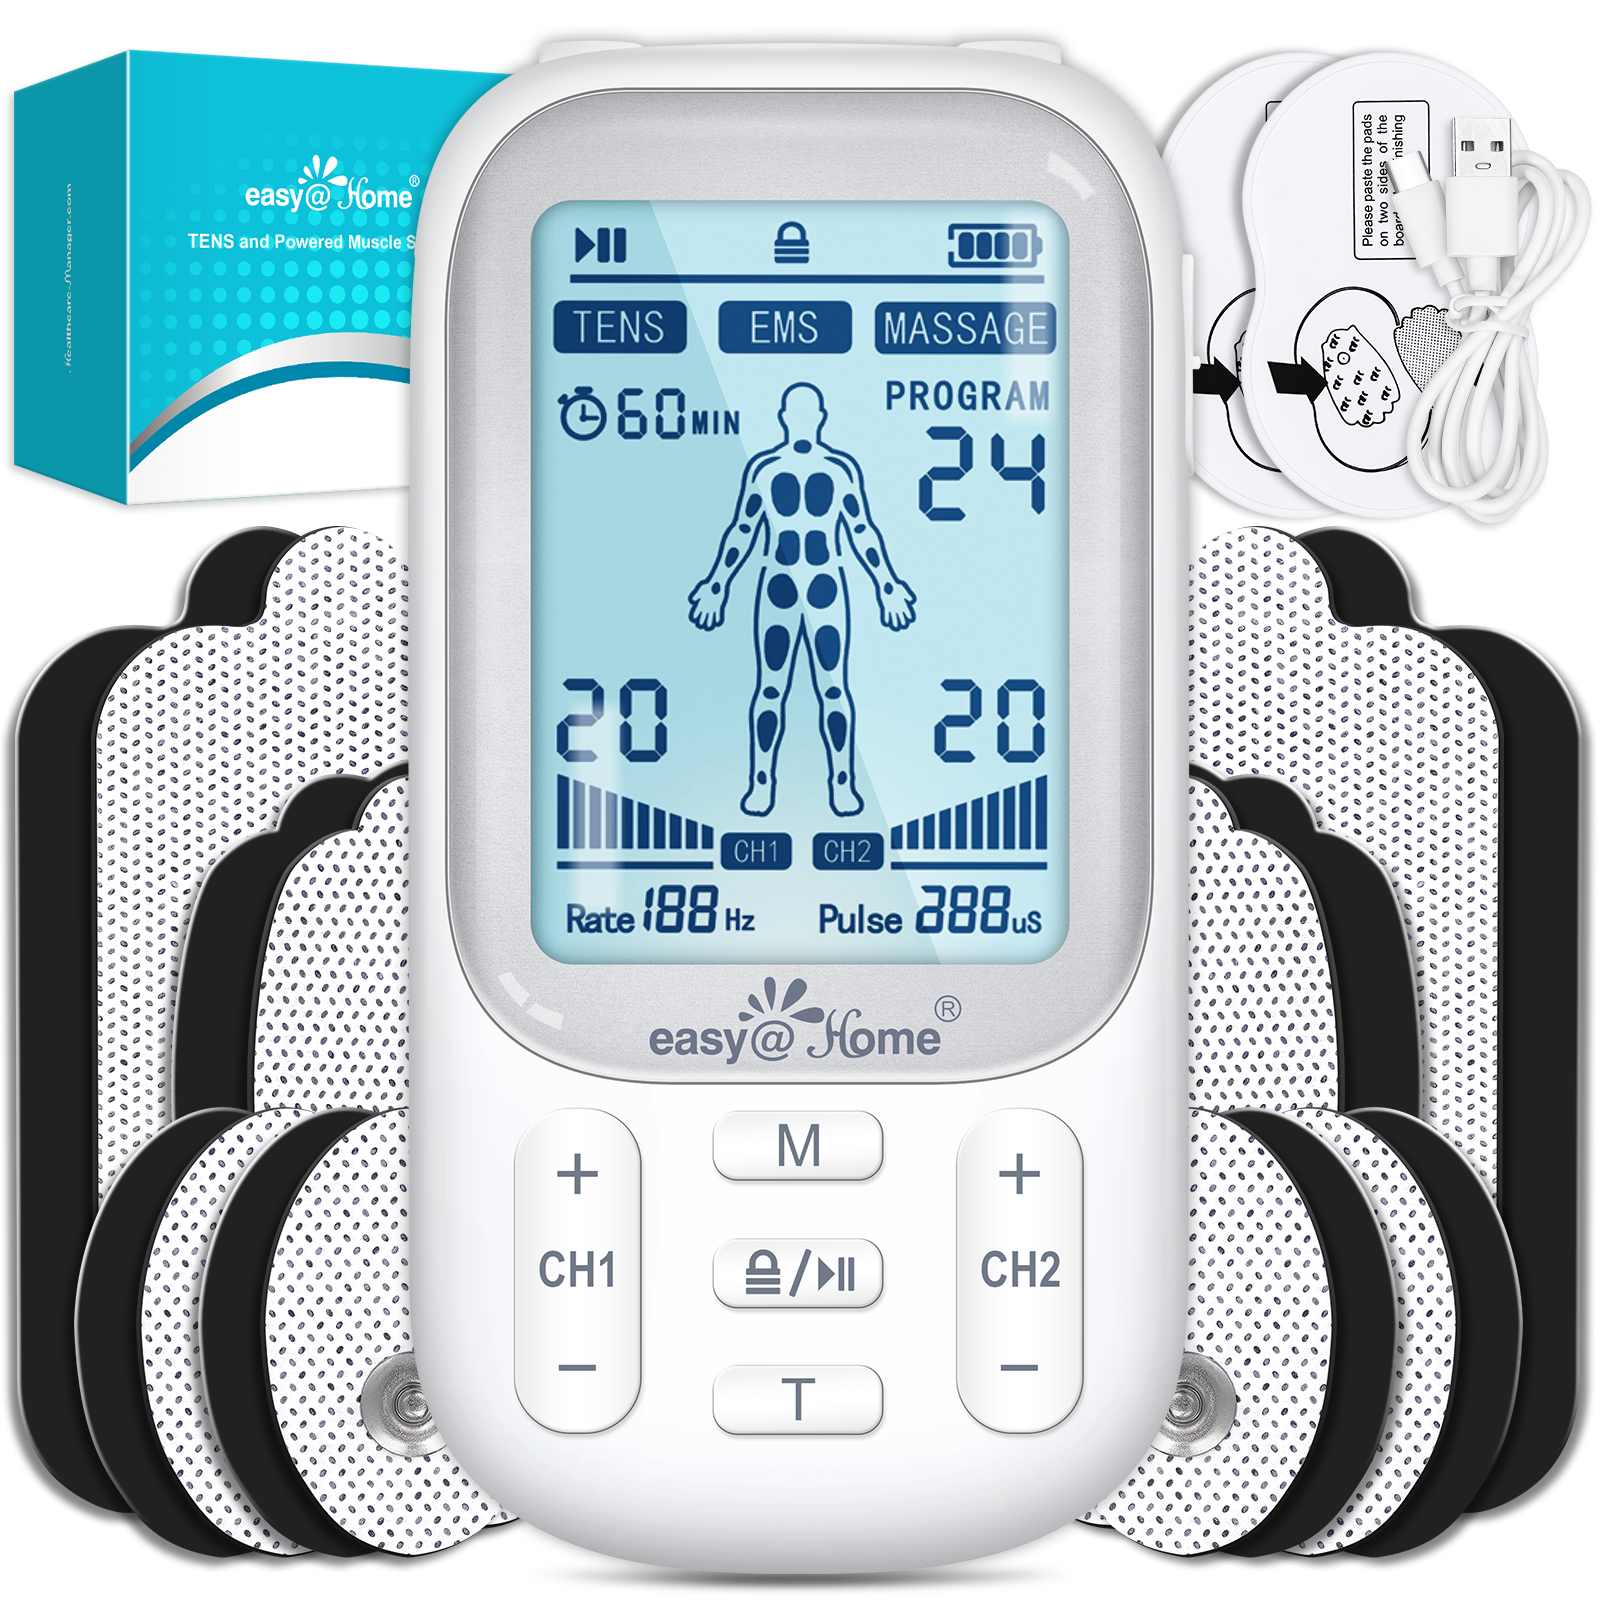 Easy@Home 16-Mode Premium Handheld TENS Electronic Pulse Massager Unit with  Rechargeable Battery, US Stock, EHE029G (Portable Pain Relief Therapy Device)